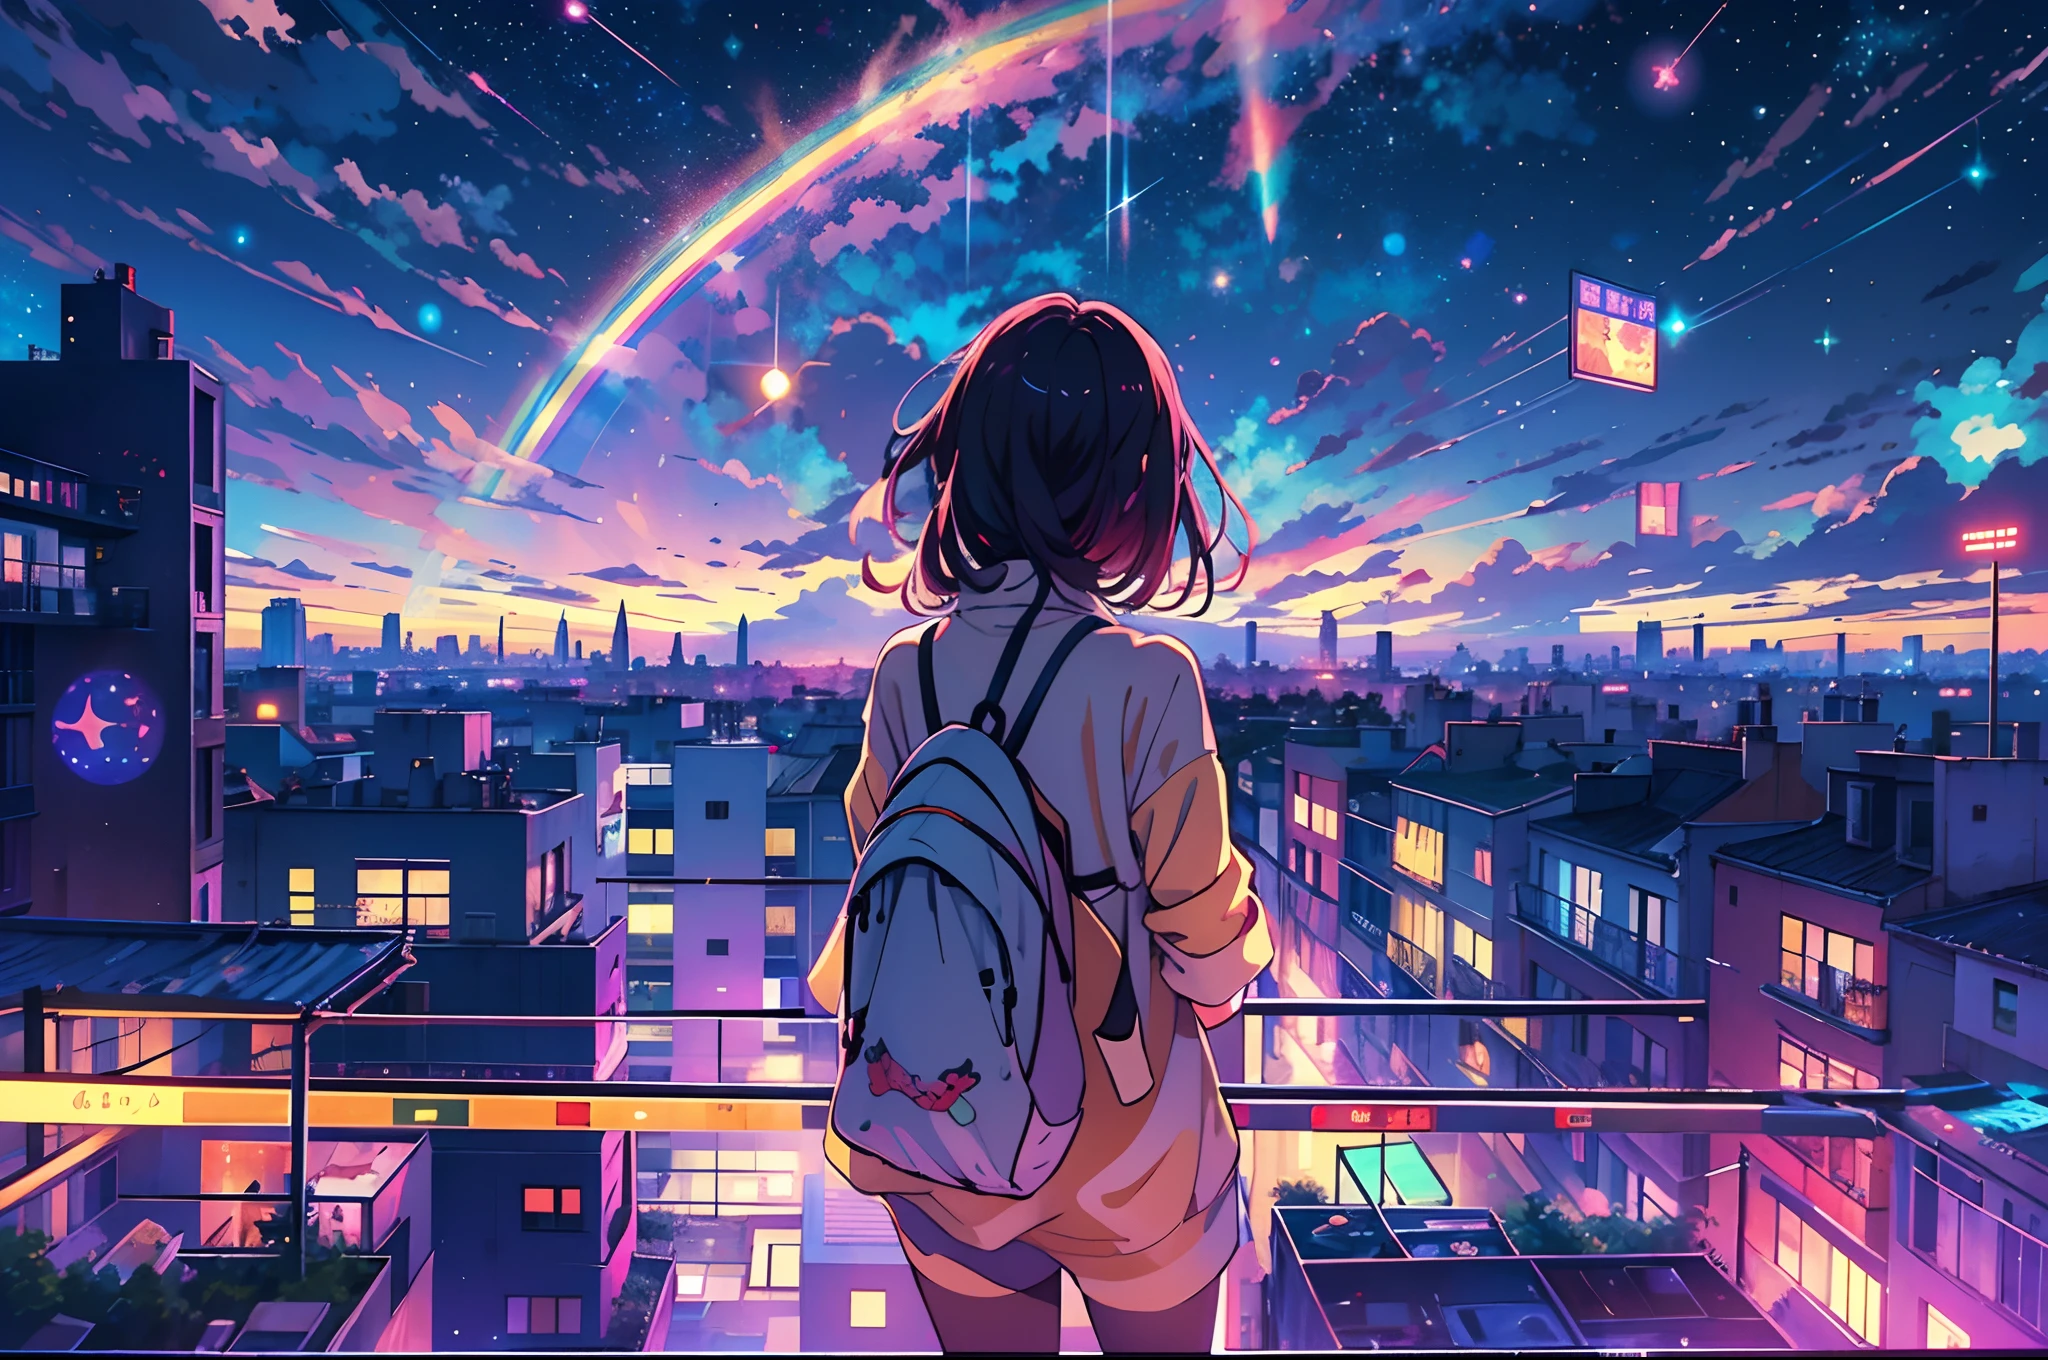 anime girl standing on rooftop looking at night sky with stars and rainbow, rainbow starry night, anime wallpaper 4k, anime wallpaper 4 k, 4k anime wallpaper, anime art wallpaper 8 k, anime art wallpaper 4k, anime art wallpaper 4 k, anime style 4 k, makoto shinkai cyril rolando, 4 k manga wallpaper, anime wallpaper, amazing wallpaper, shooting stars